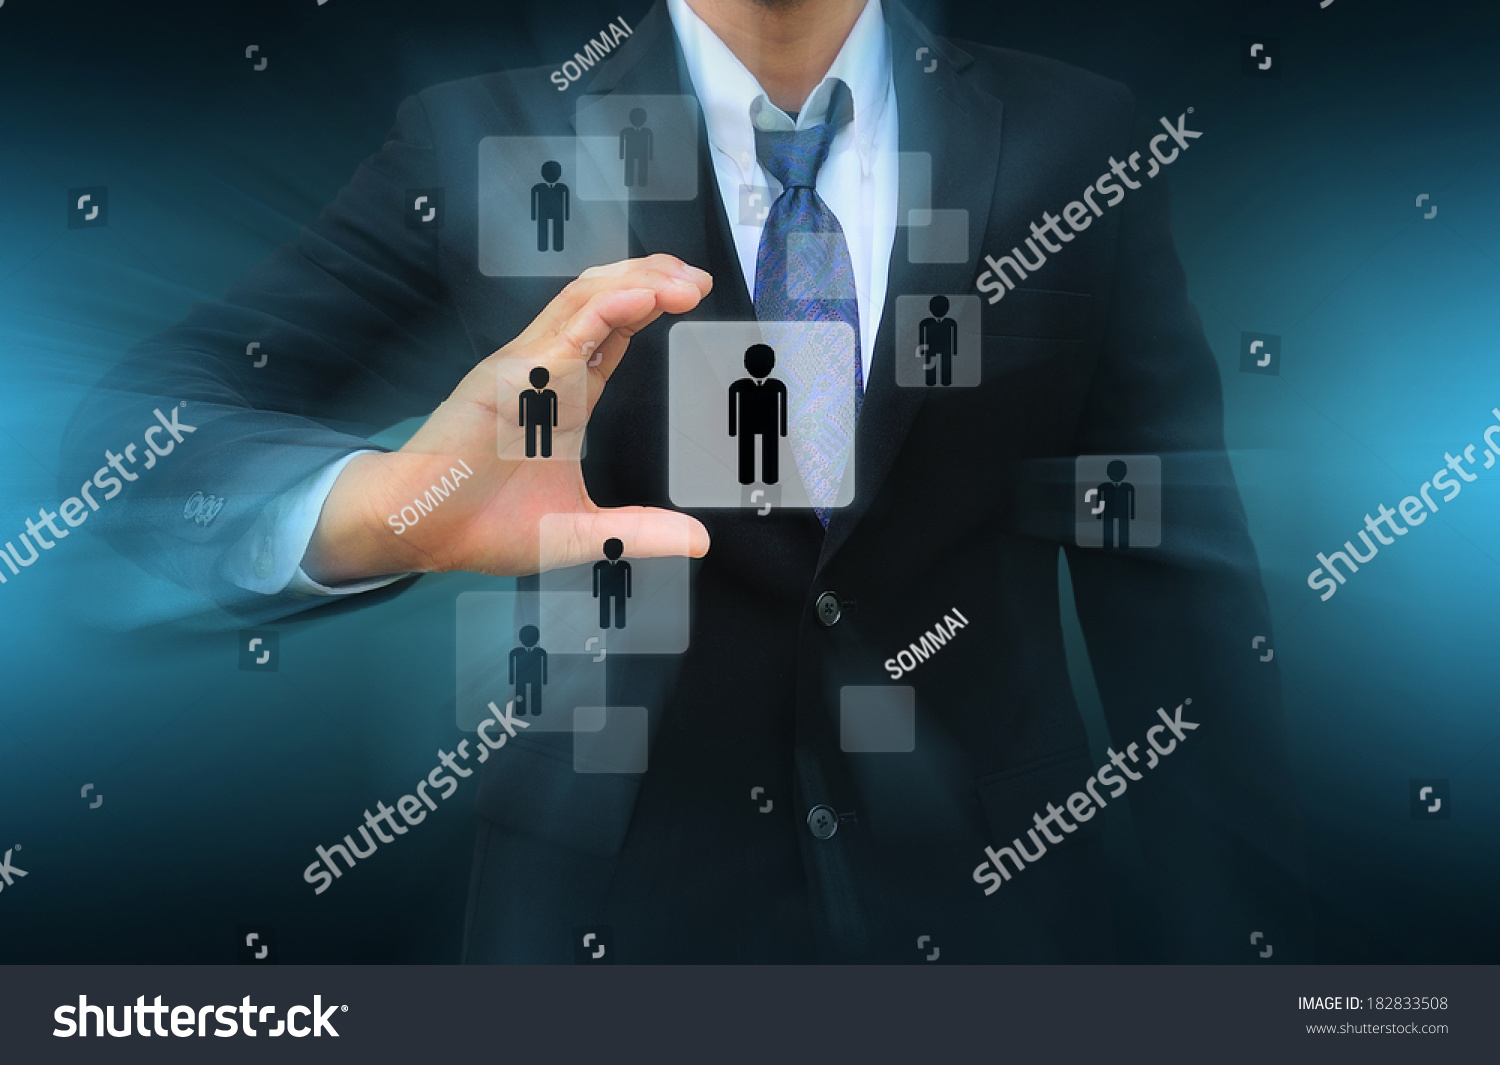 Businessman Choosing the right person #182833508